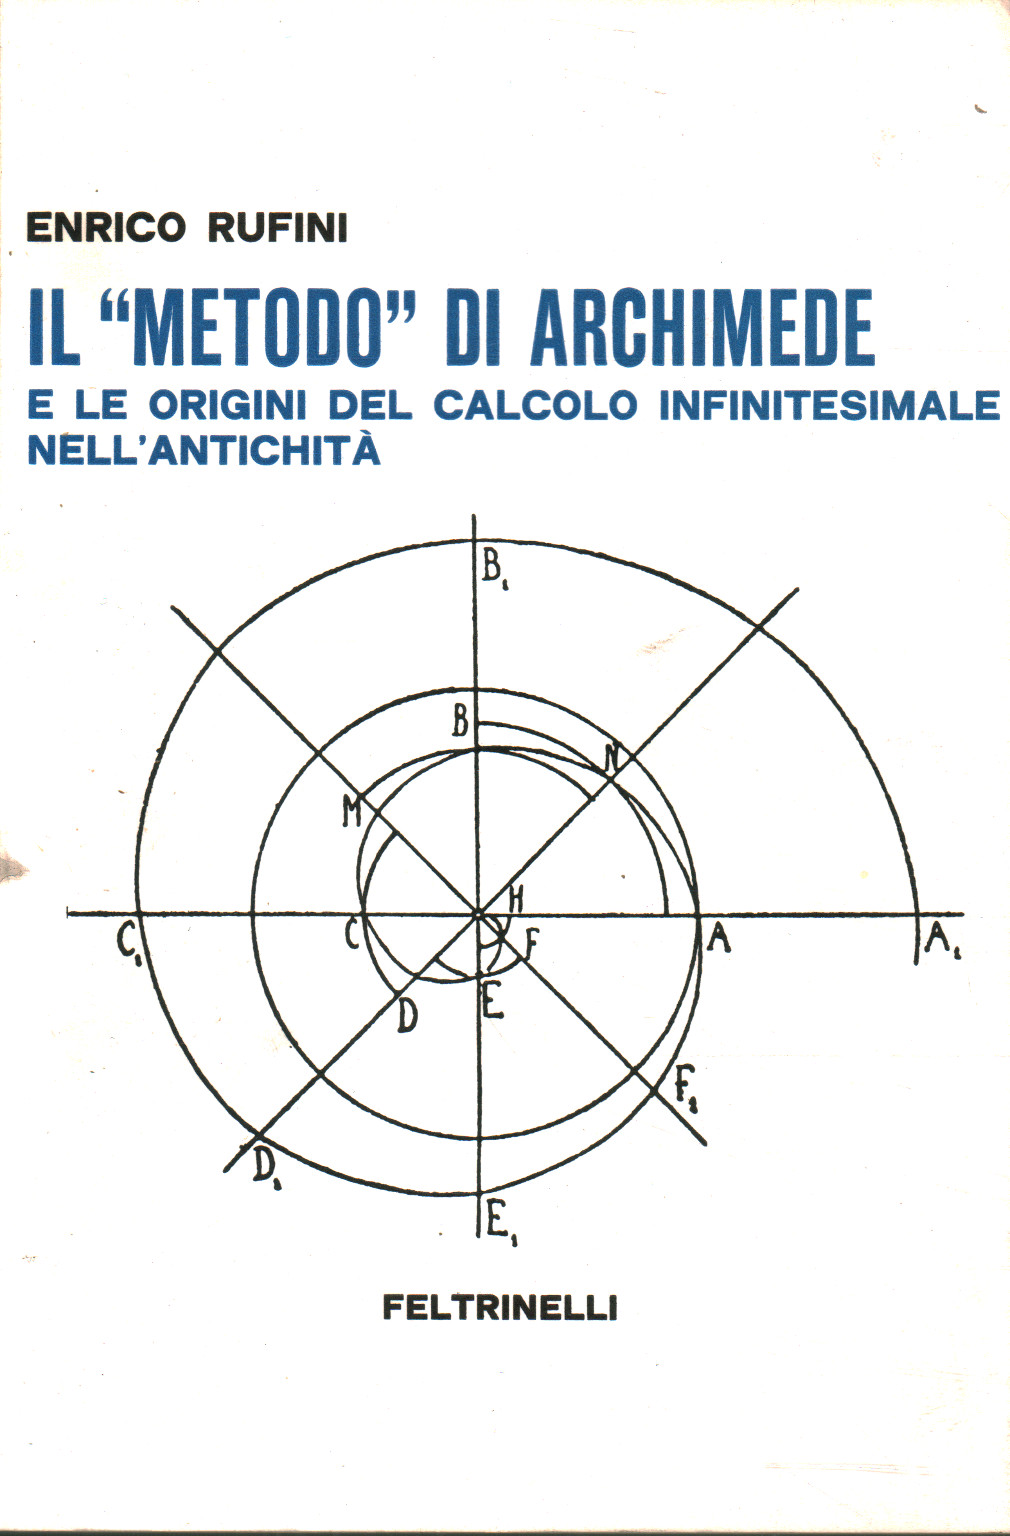 Archimedes' method and the origins of calculus in, Enrico Rufini